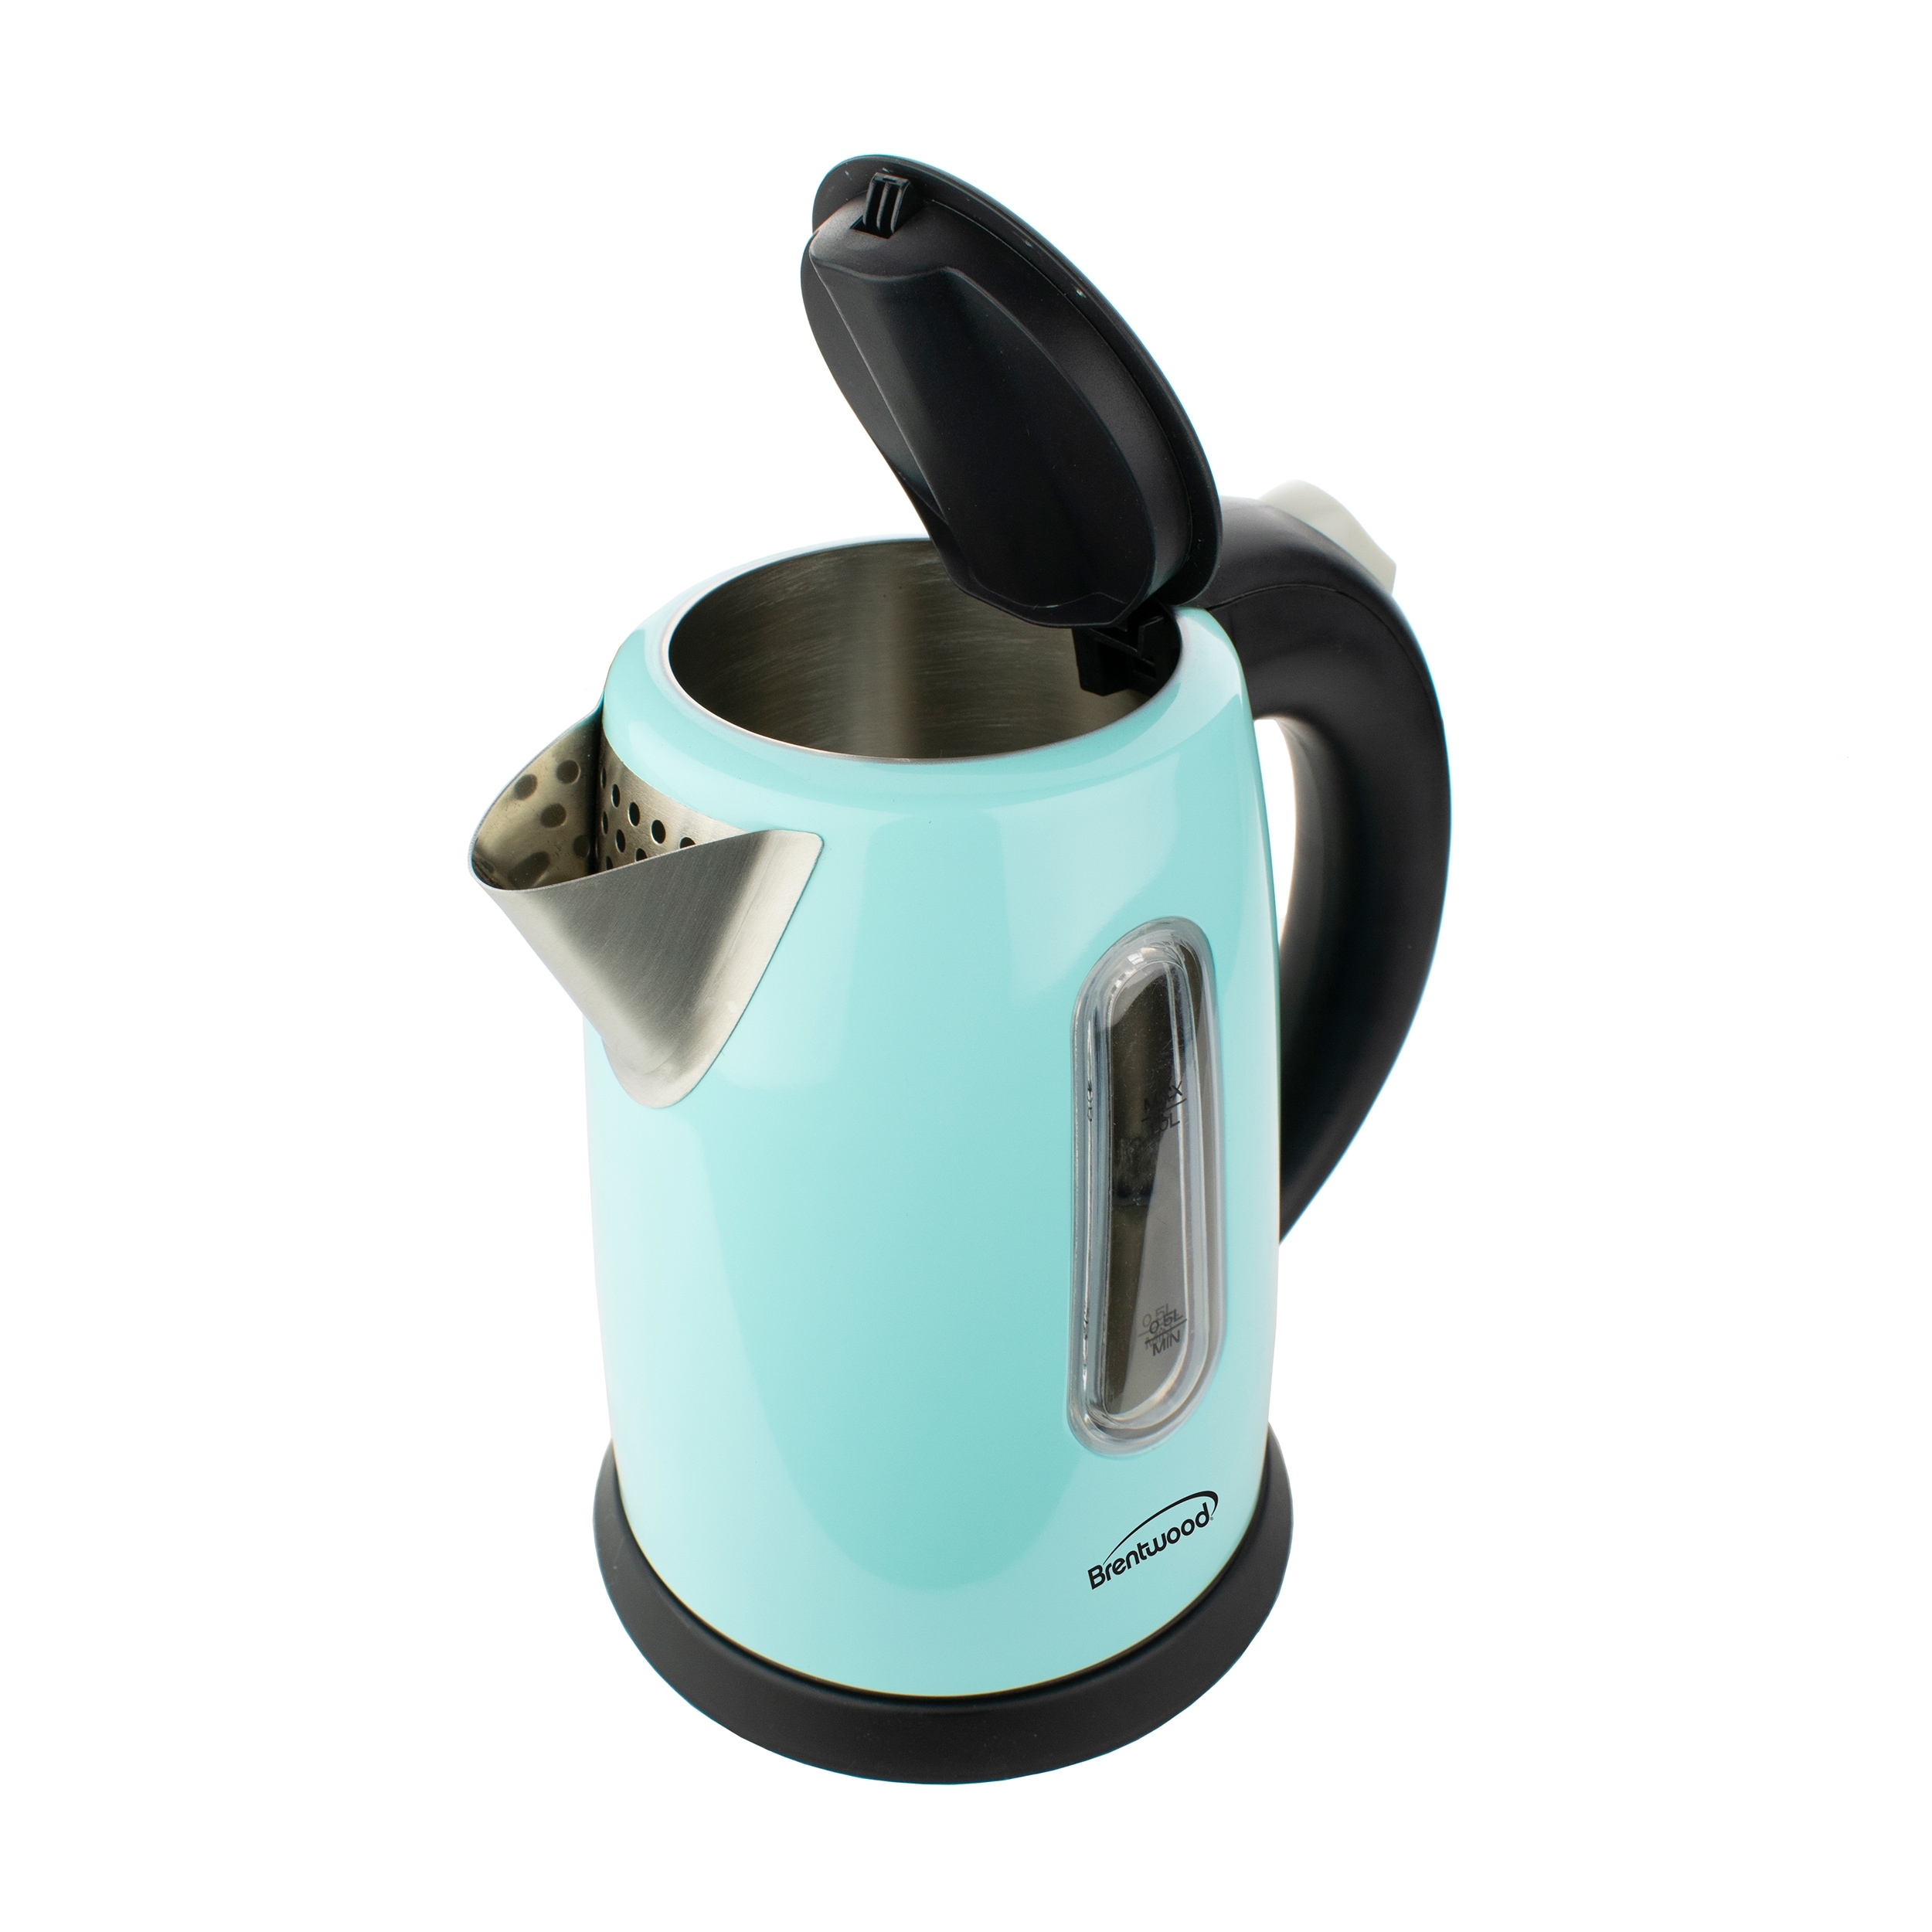 https://ak1.ostkcdn.com/images/products/is/images/direct/5e2267865fe048dd859658250c5d2d832578c264/Brentwood-1-Liter-Stainless-Steel-Cordless-Electric-Kettle-in-Blue.jpg